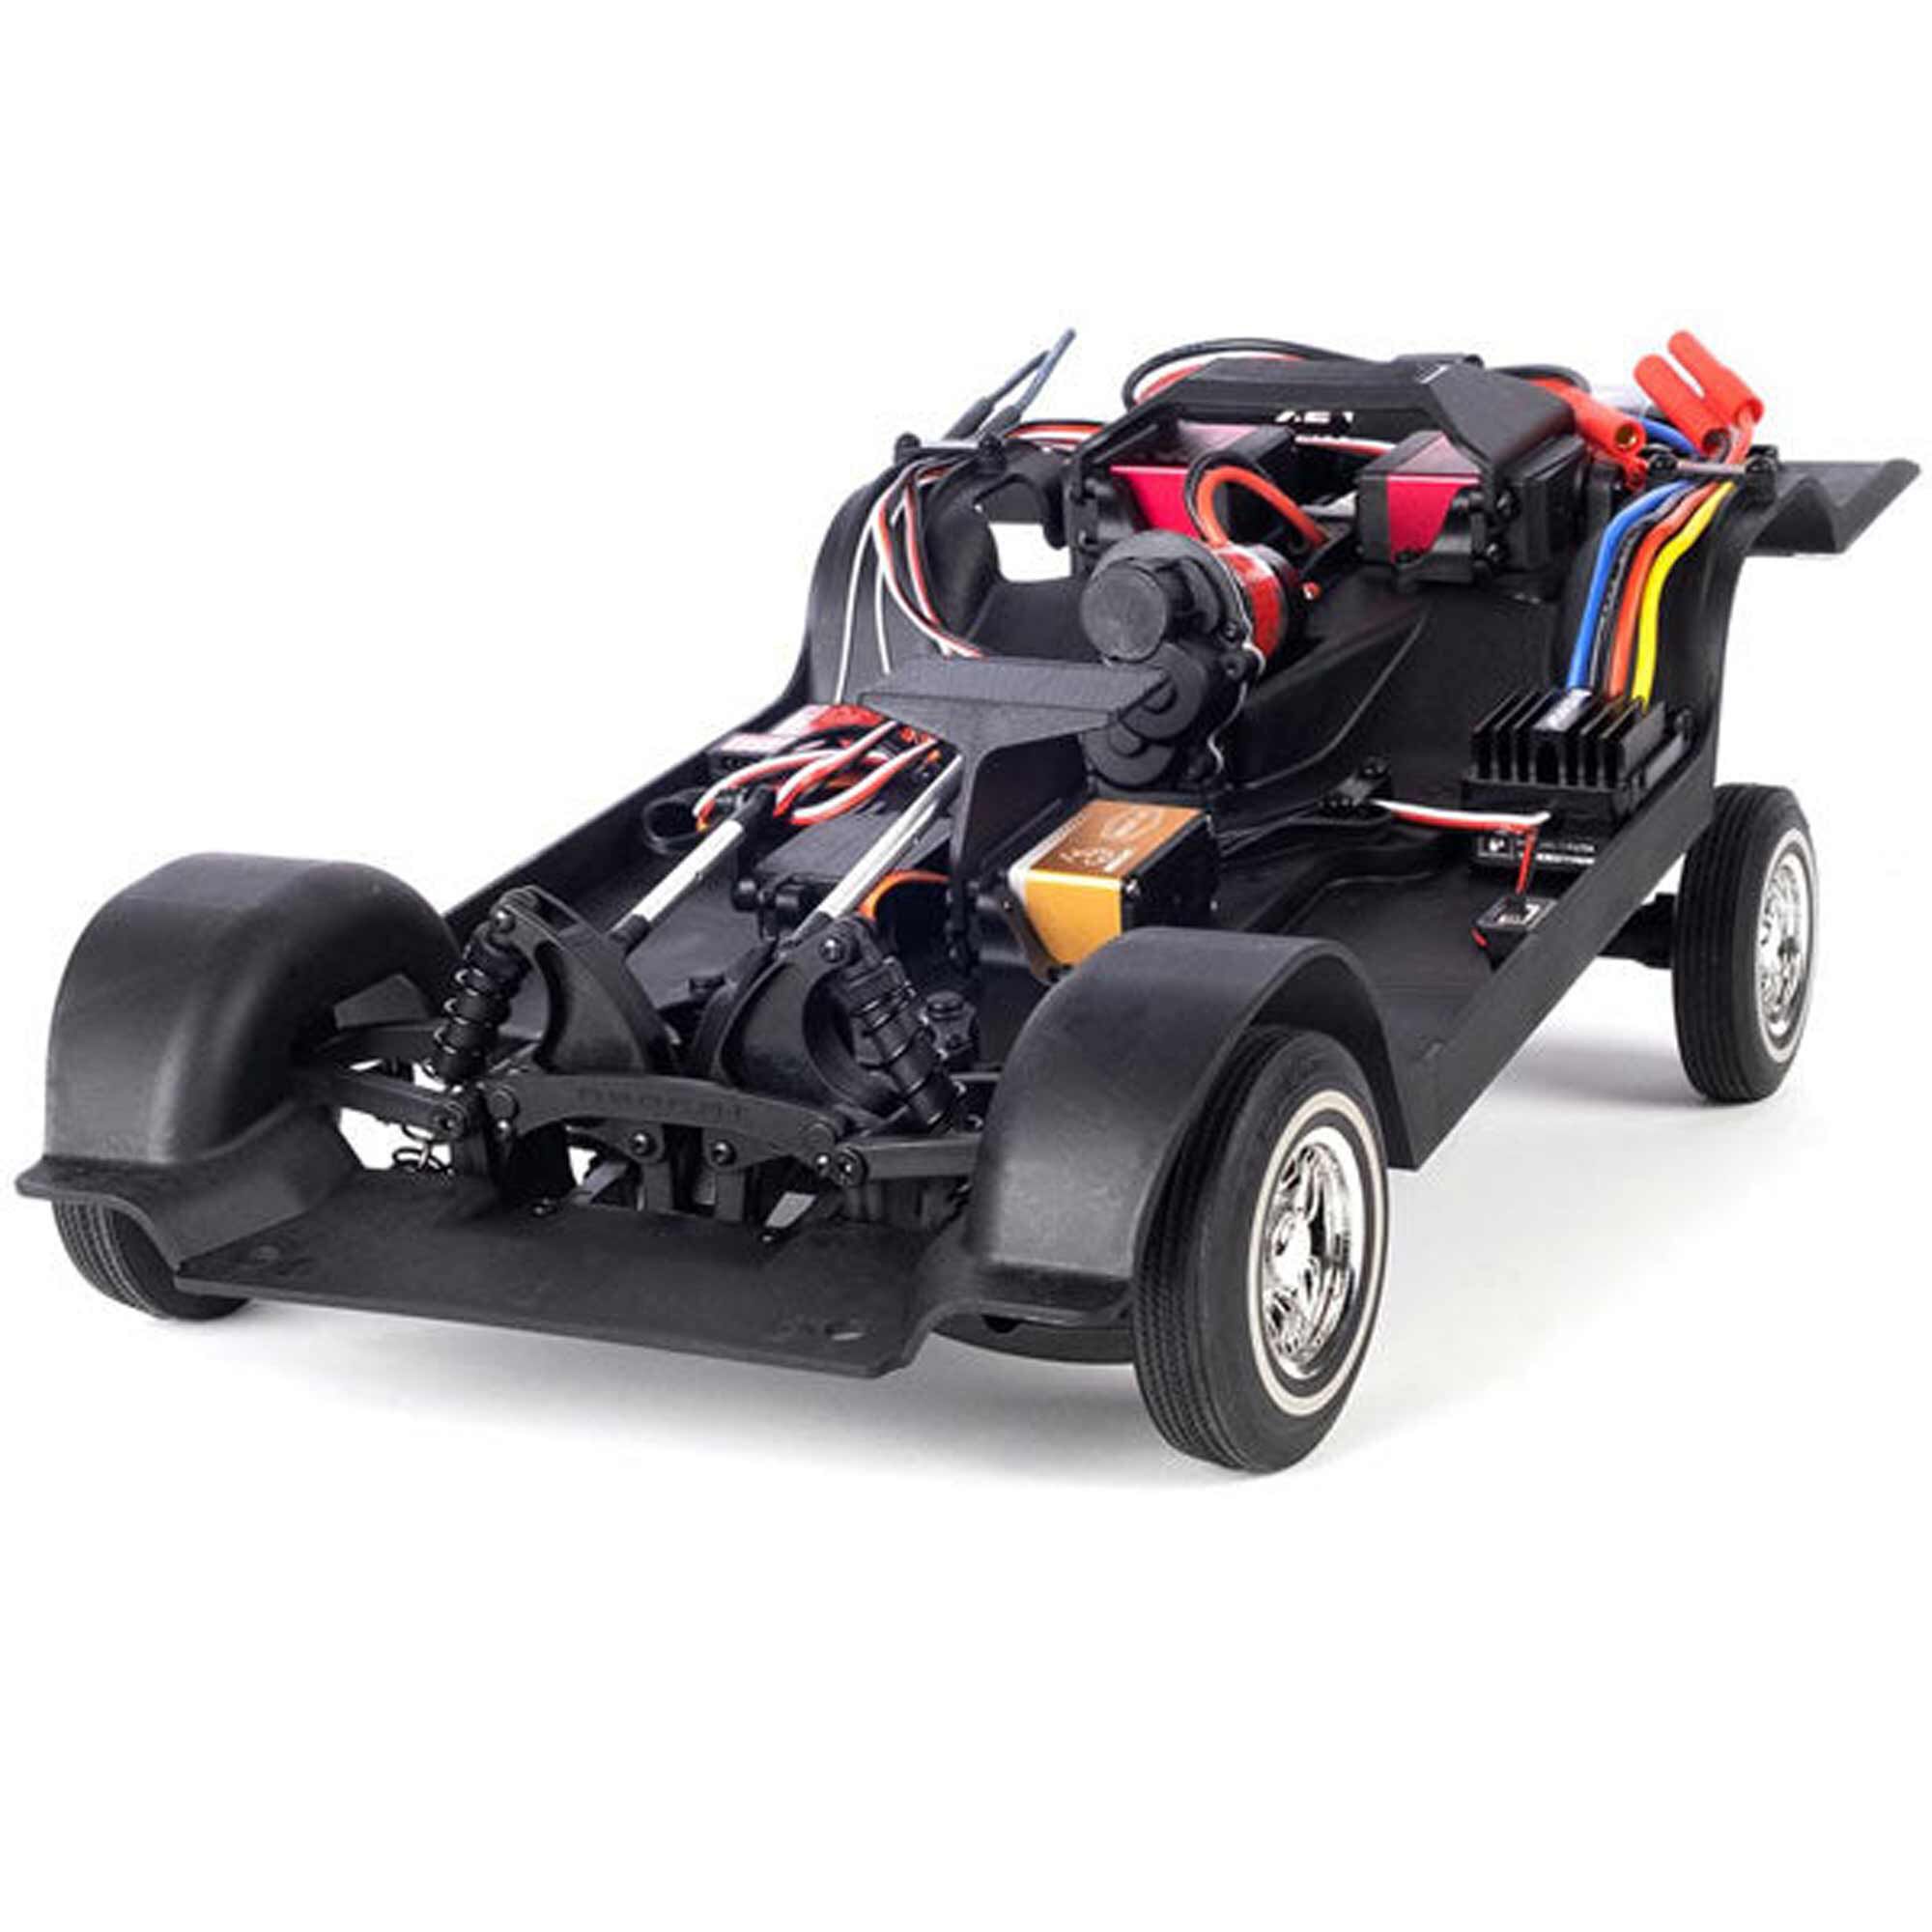 Redcat Racing 1/10 LRH285 Designers Show Lowrider Chassis Kit